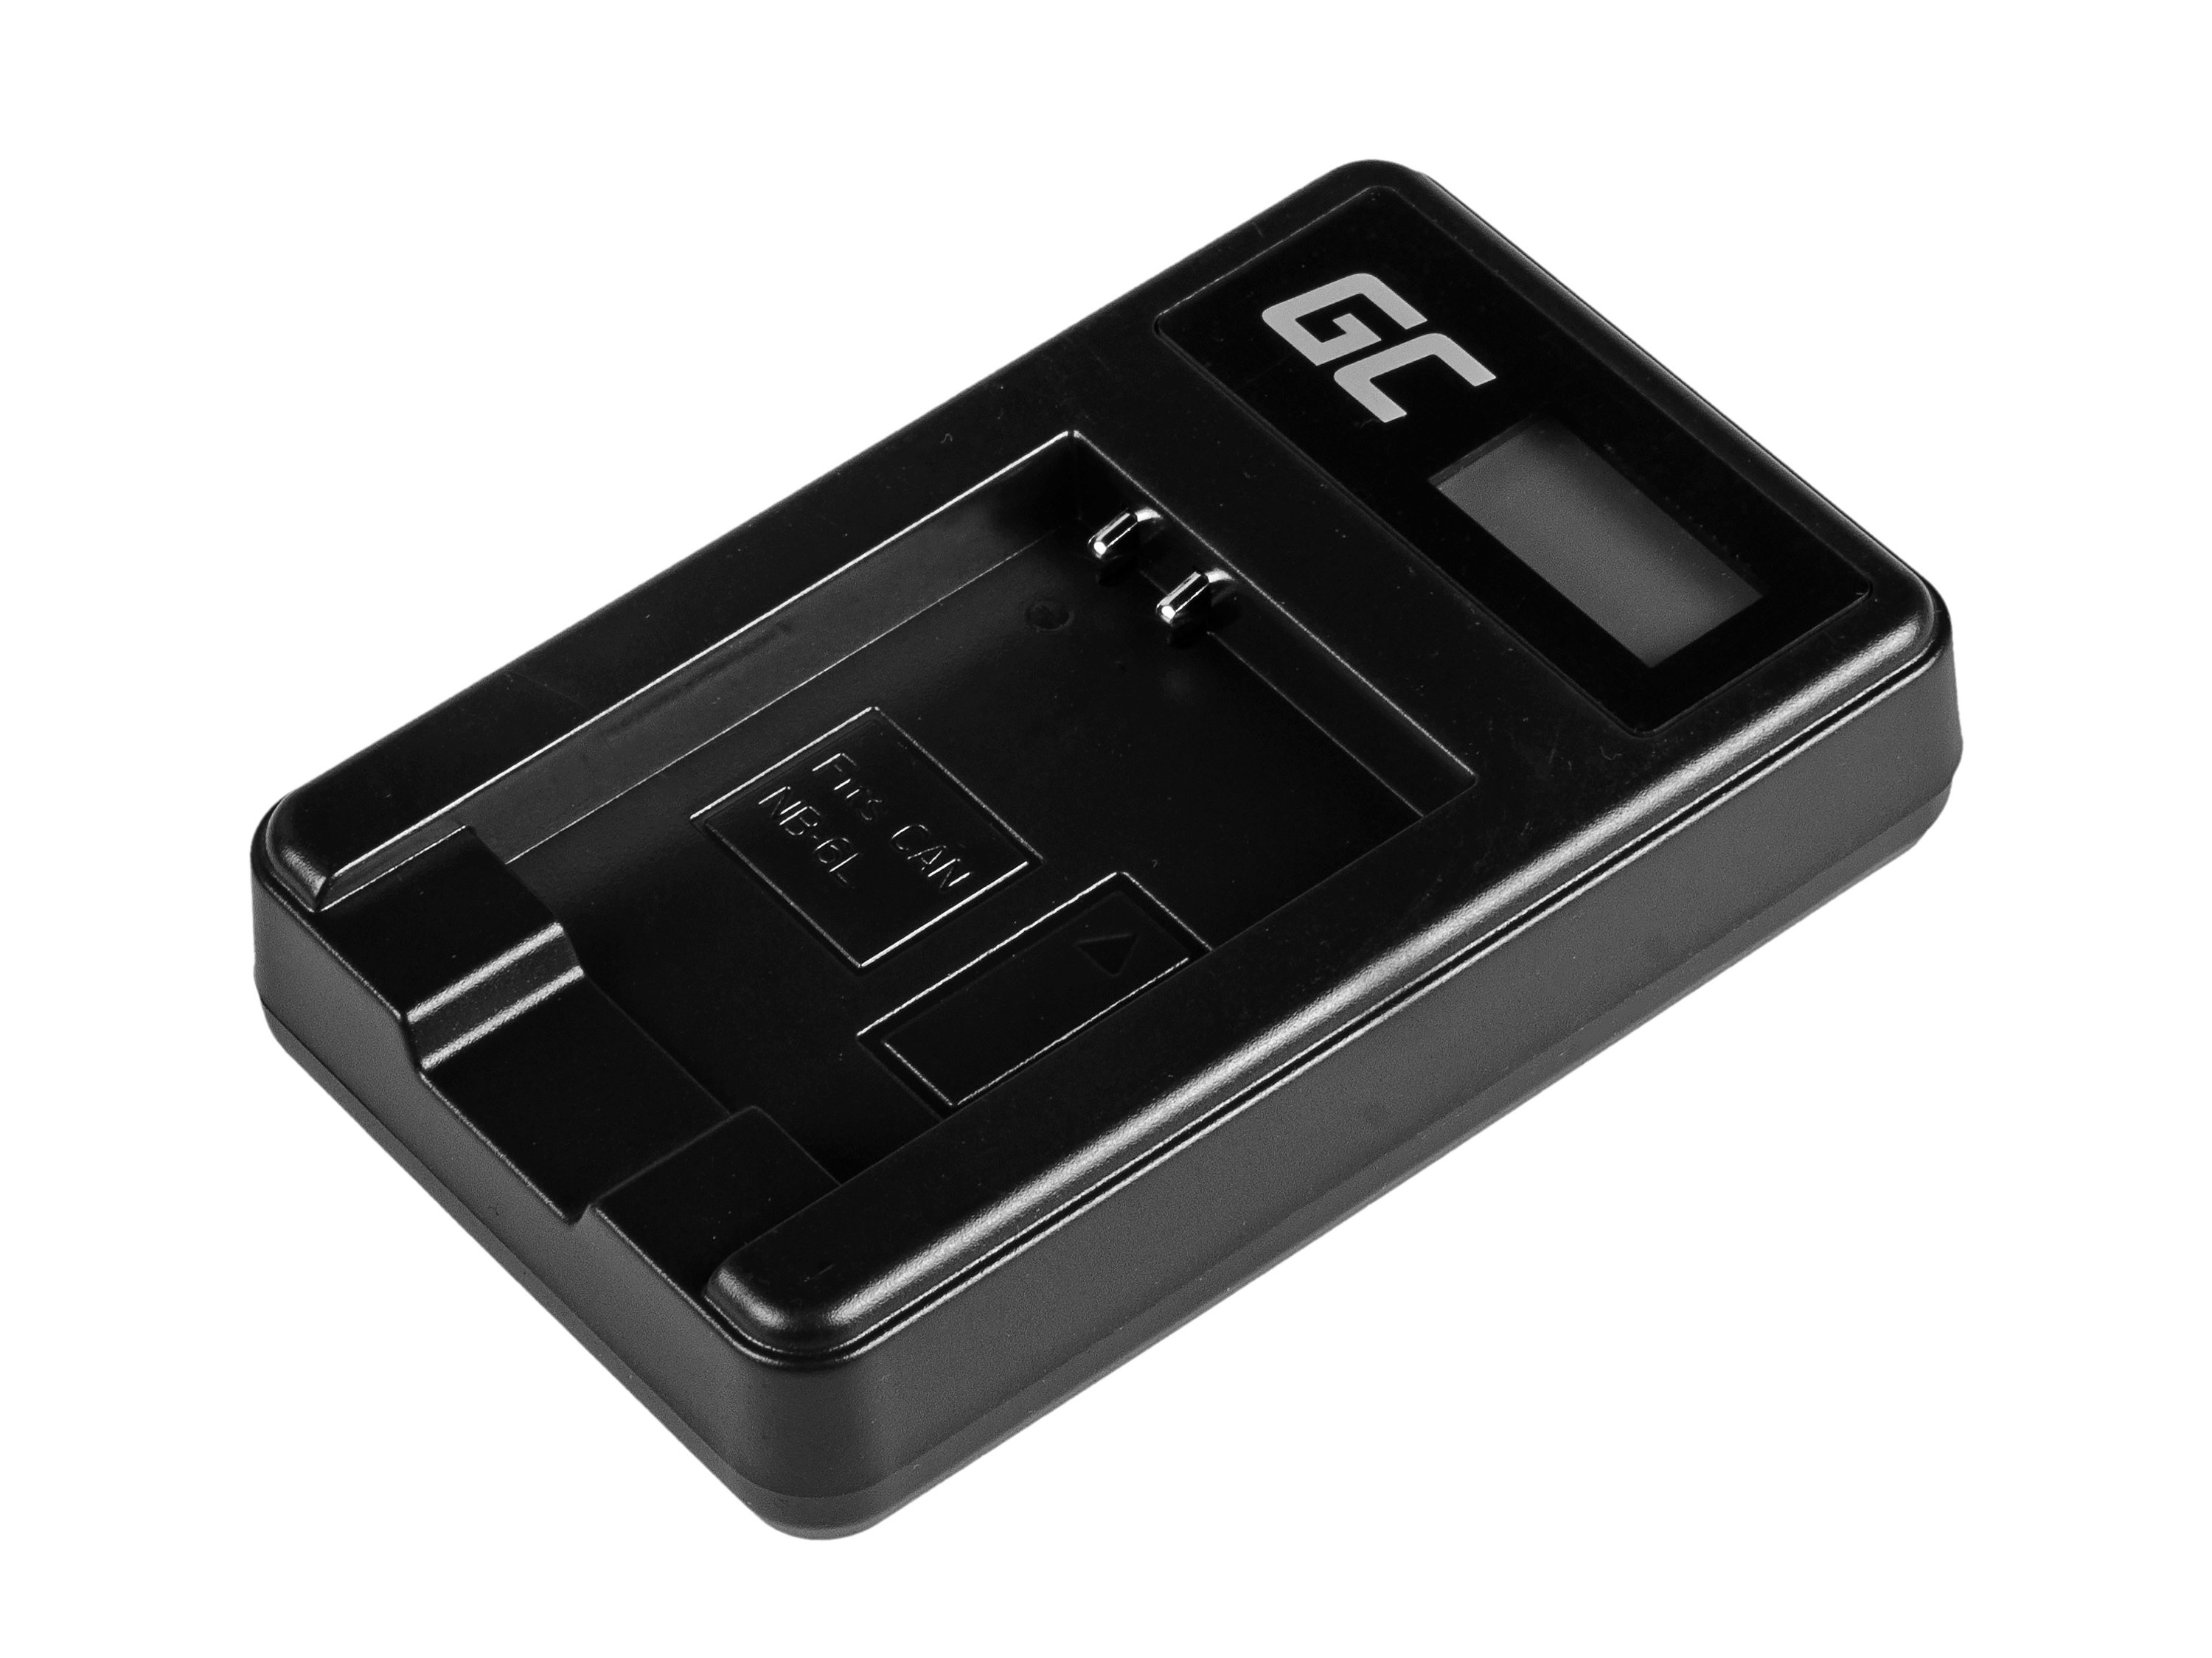 Batterij Oplader CB-2LY voor Canon NB-6L/6LH, PowerShot SX510 HS, SX520 HS, SX530 HS, SX600 HS, SX700 HS, D30.